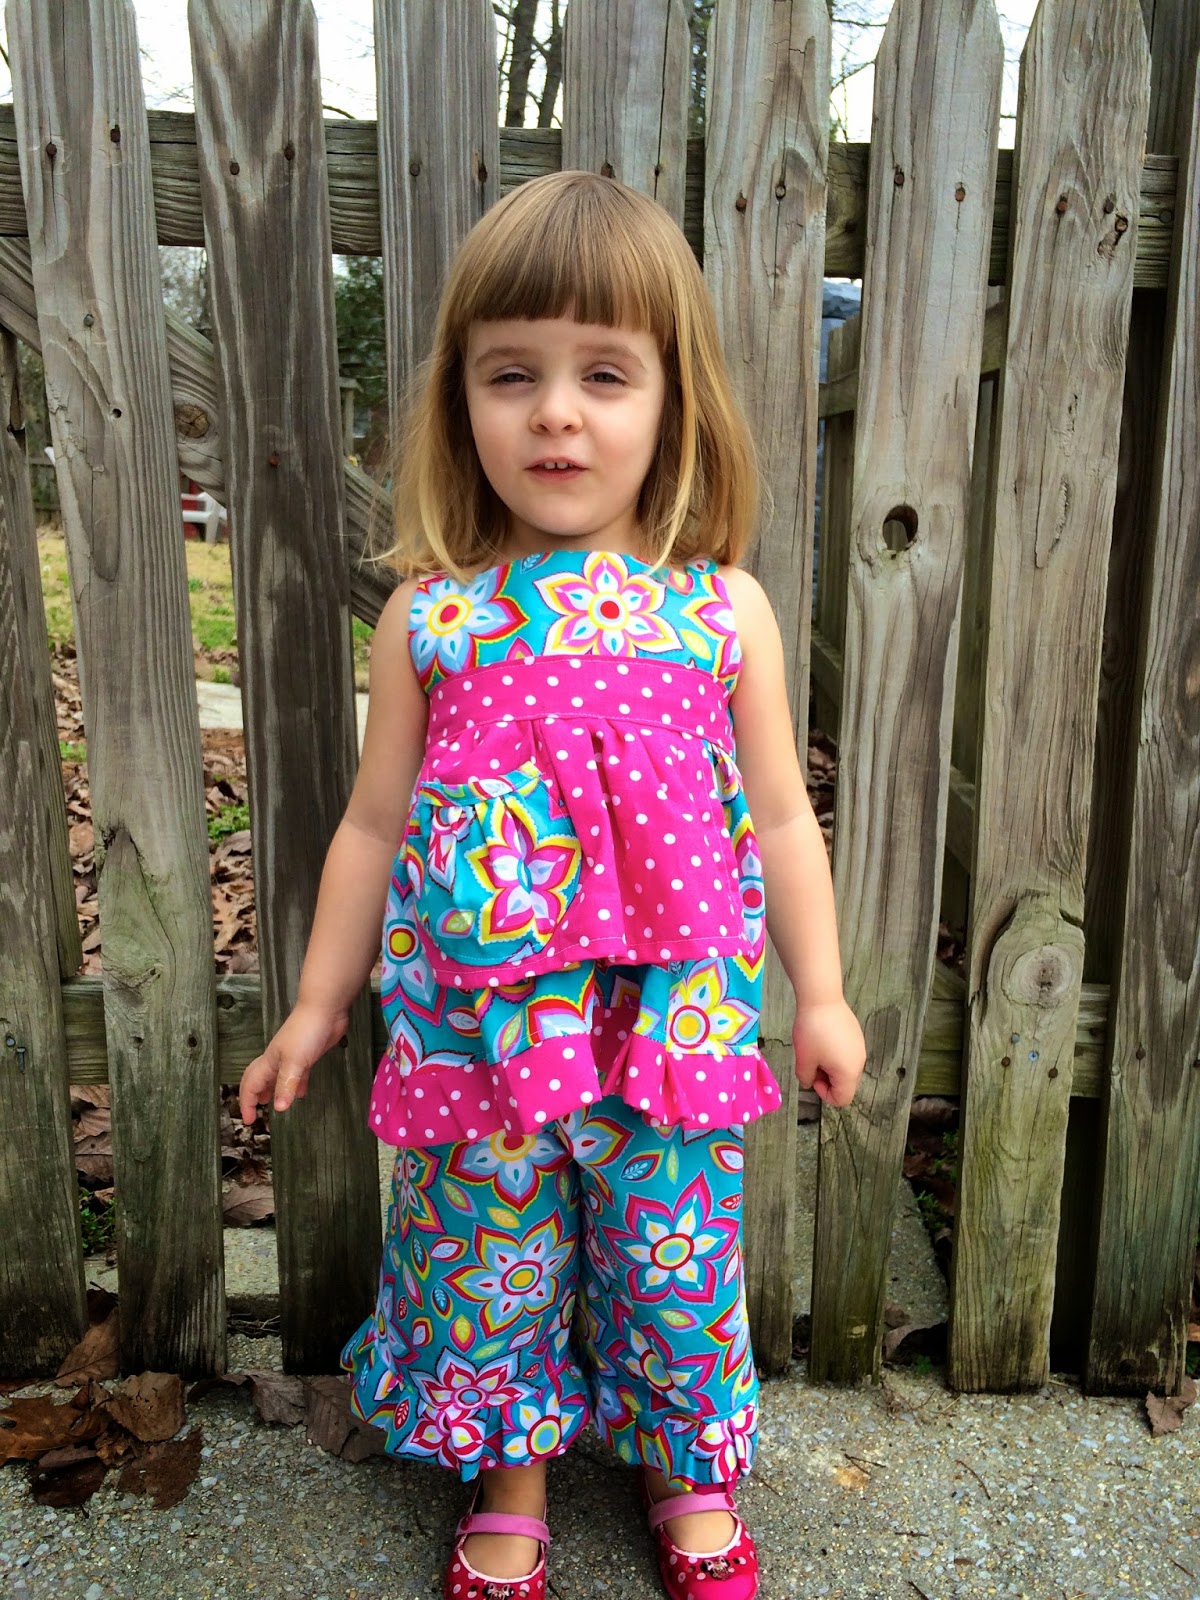 grass stains: Pinch-hitting: I got a new outfit! by Amelia